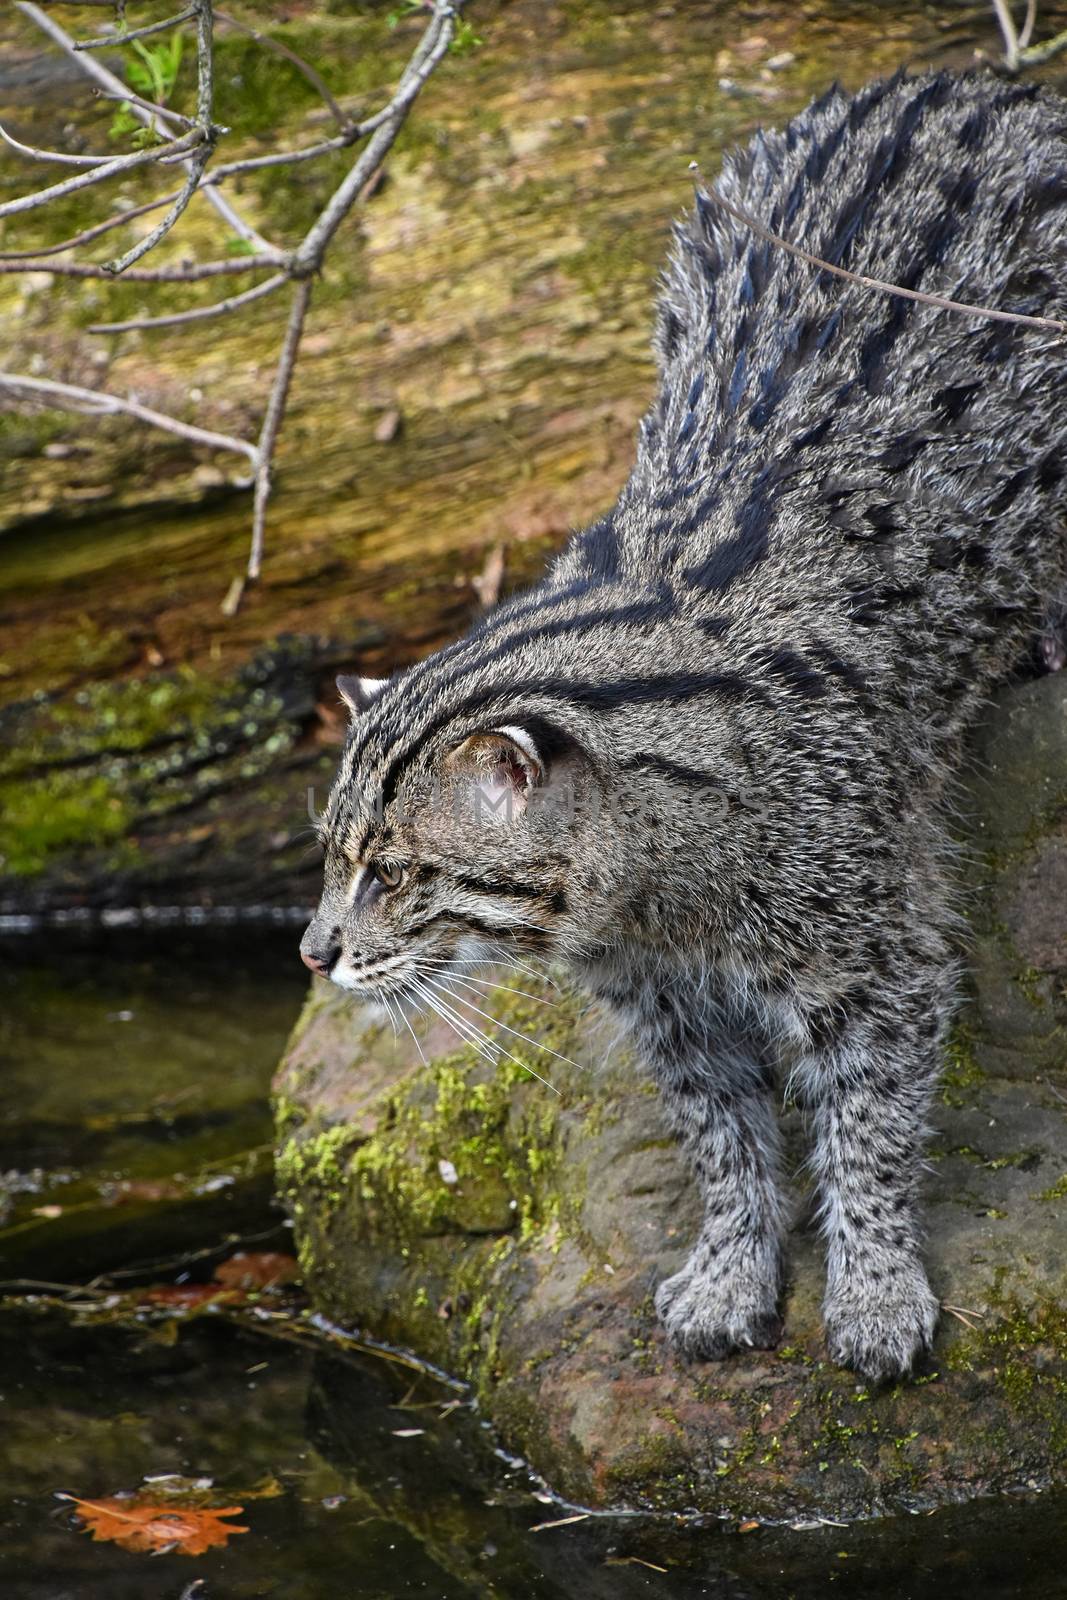 Fishing cat (Prionailurus viverrinus) hunting and watching fish in water, side high angle view